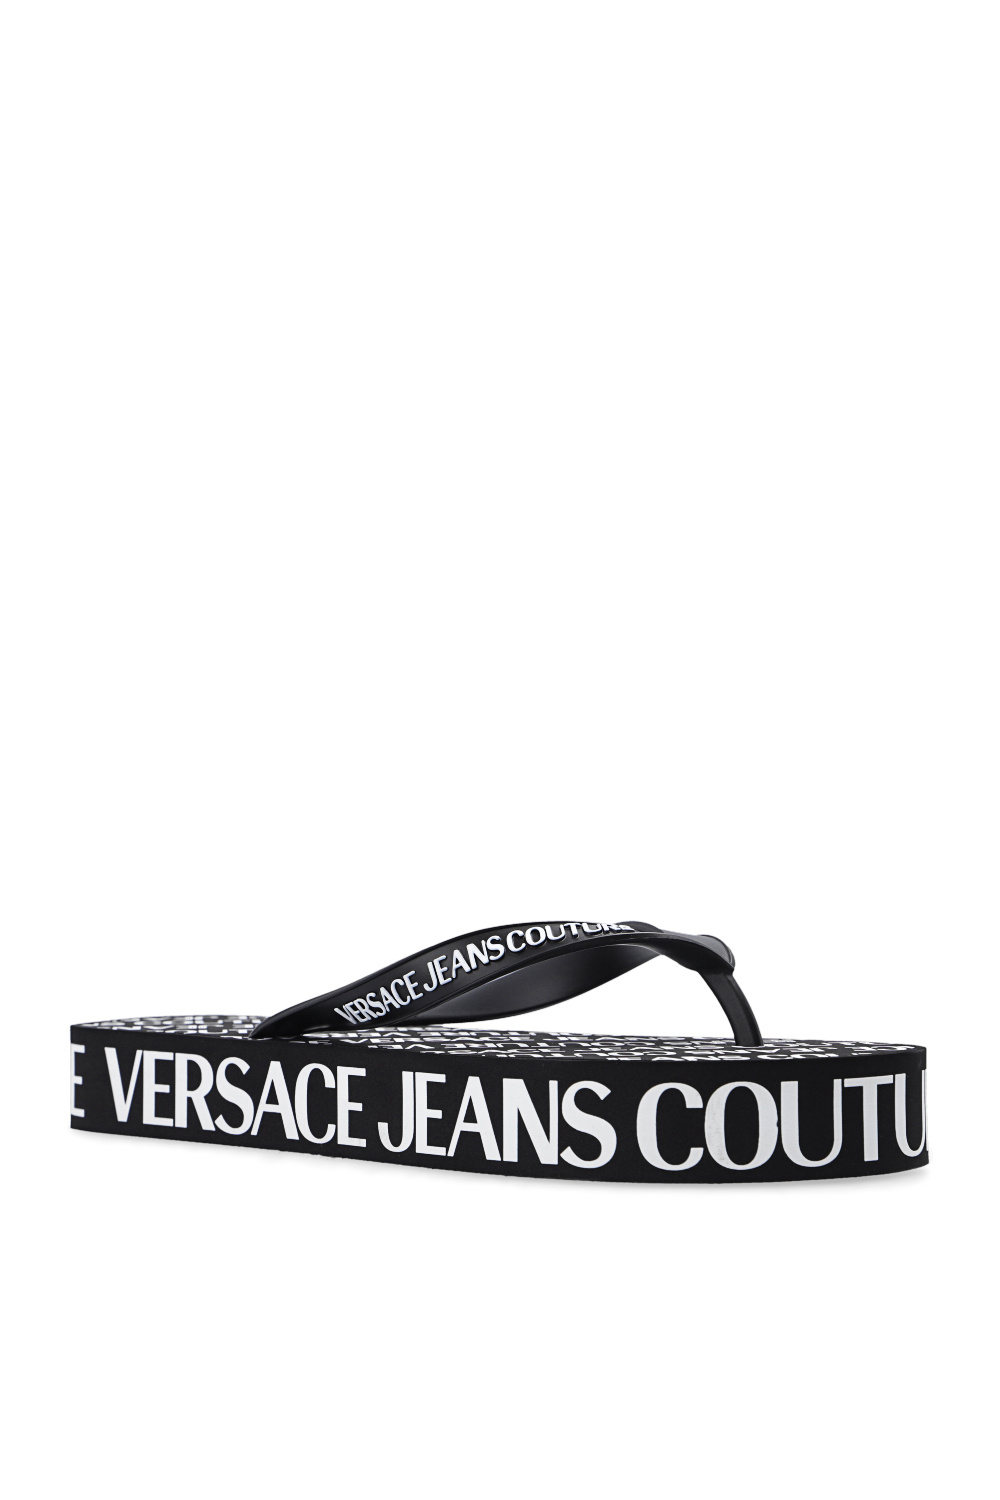 Versace Jeans Couture Hiking Boots SUPERGA